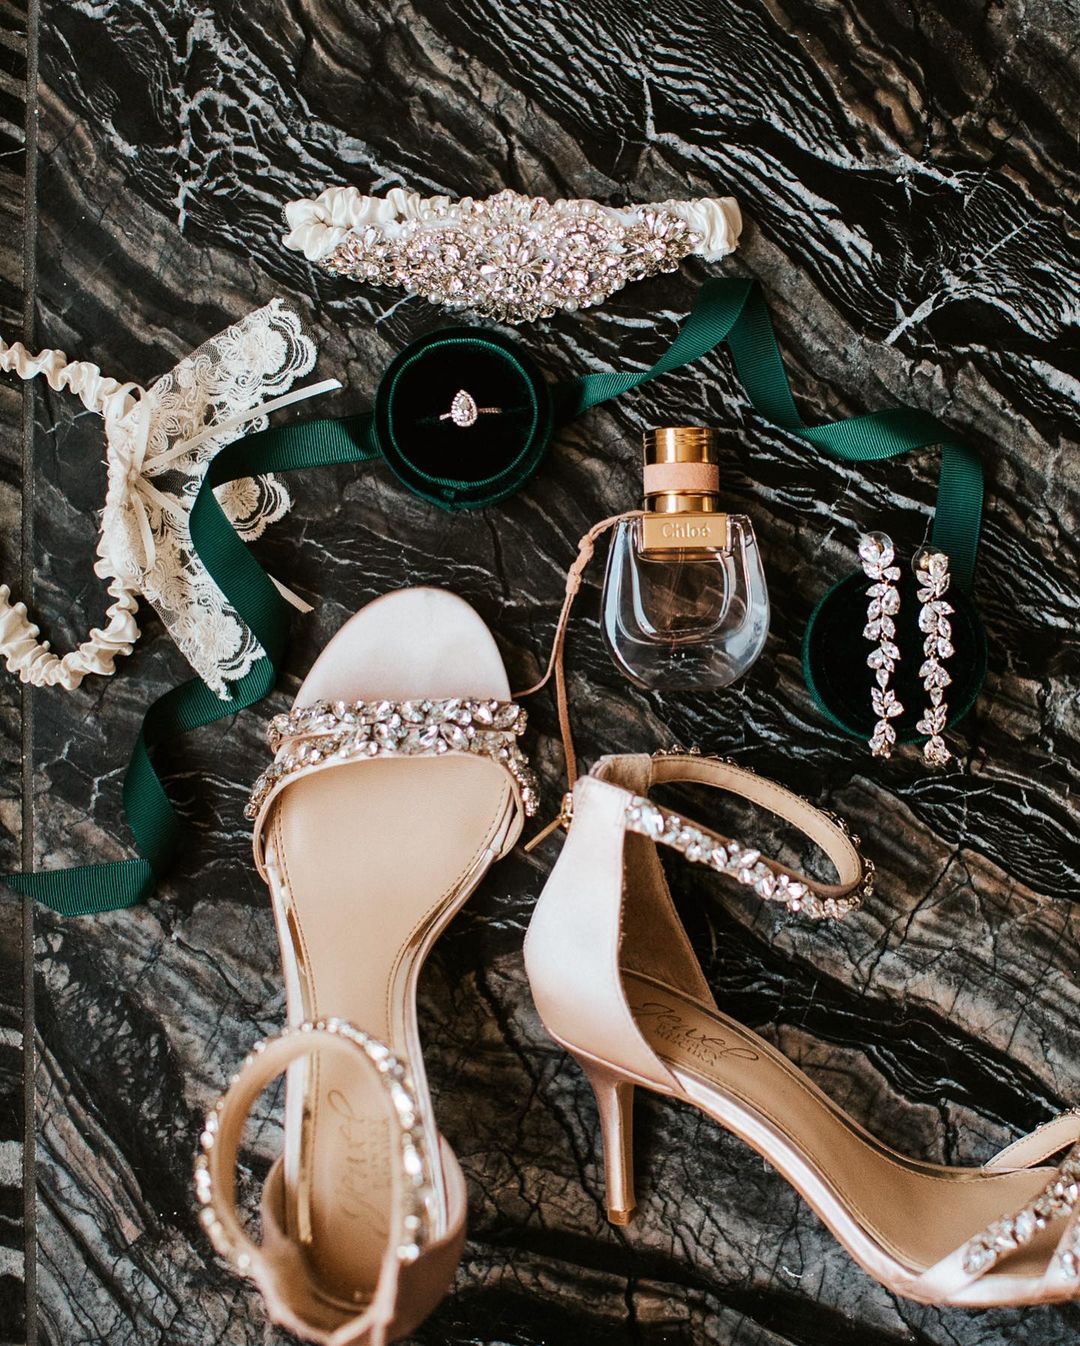 A close up shot of a wedding ring, bride's sandals, and other bridal accessories